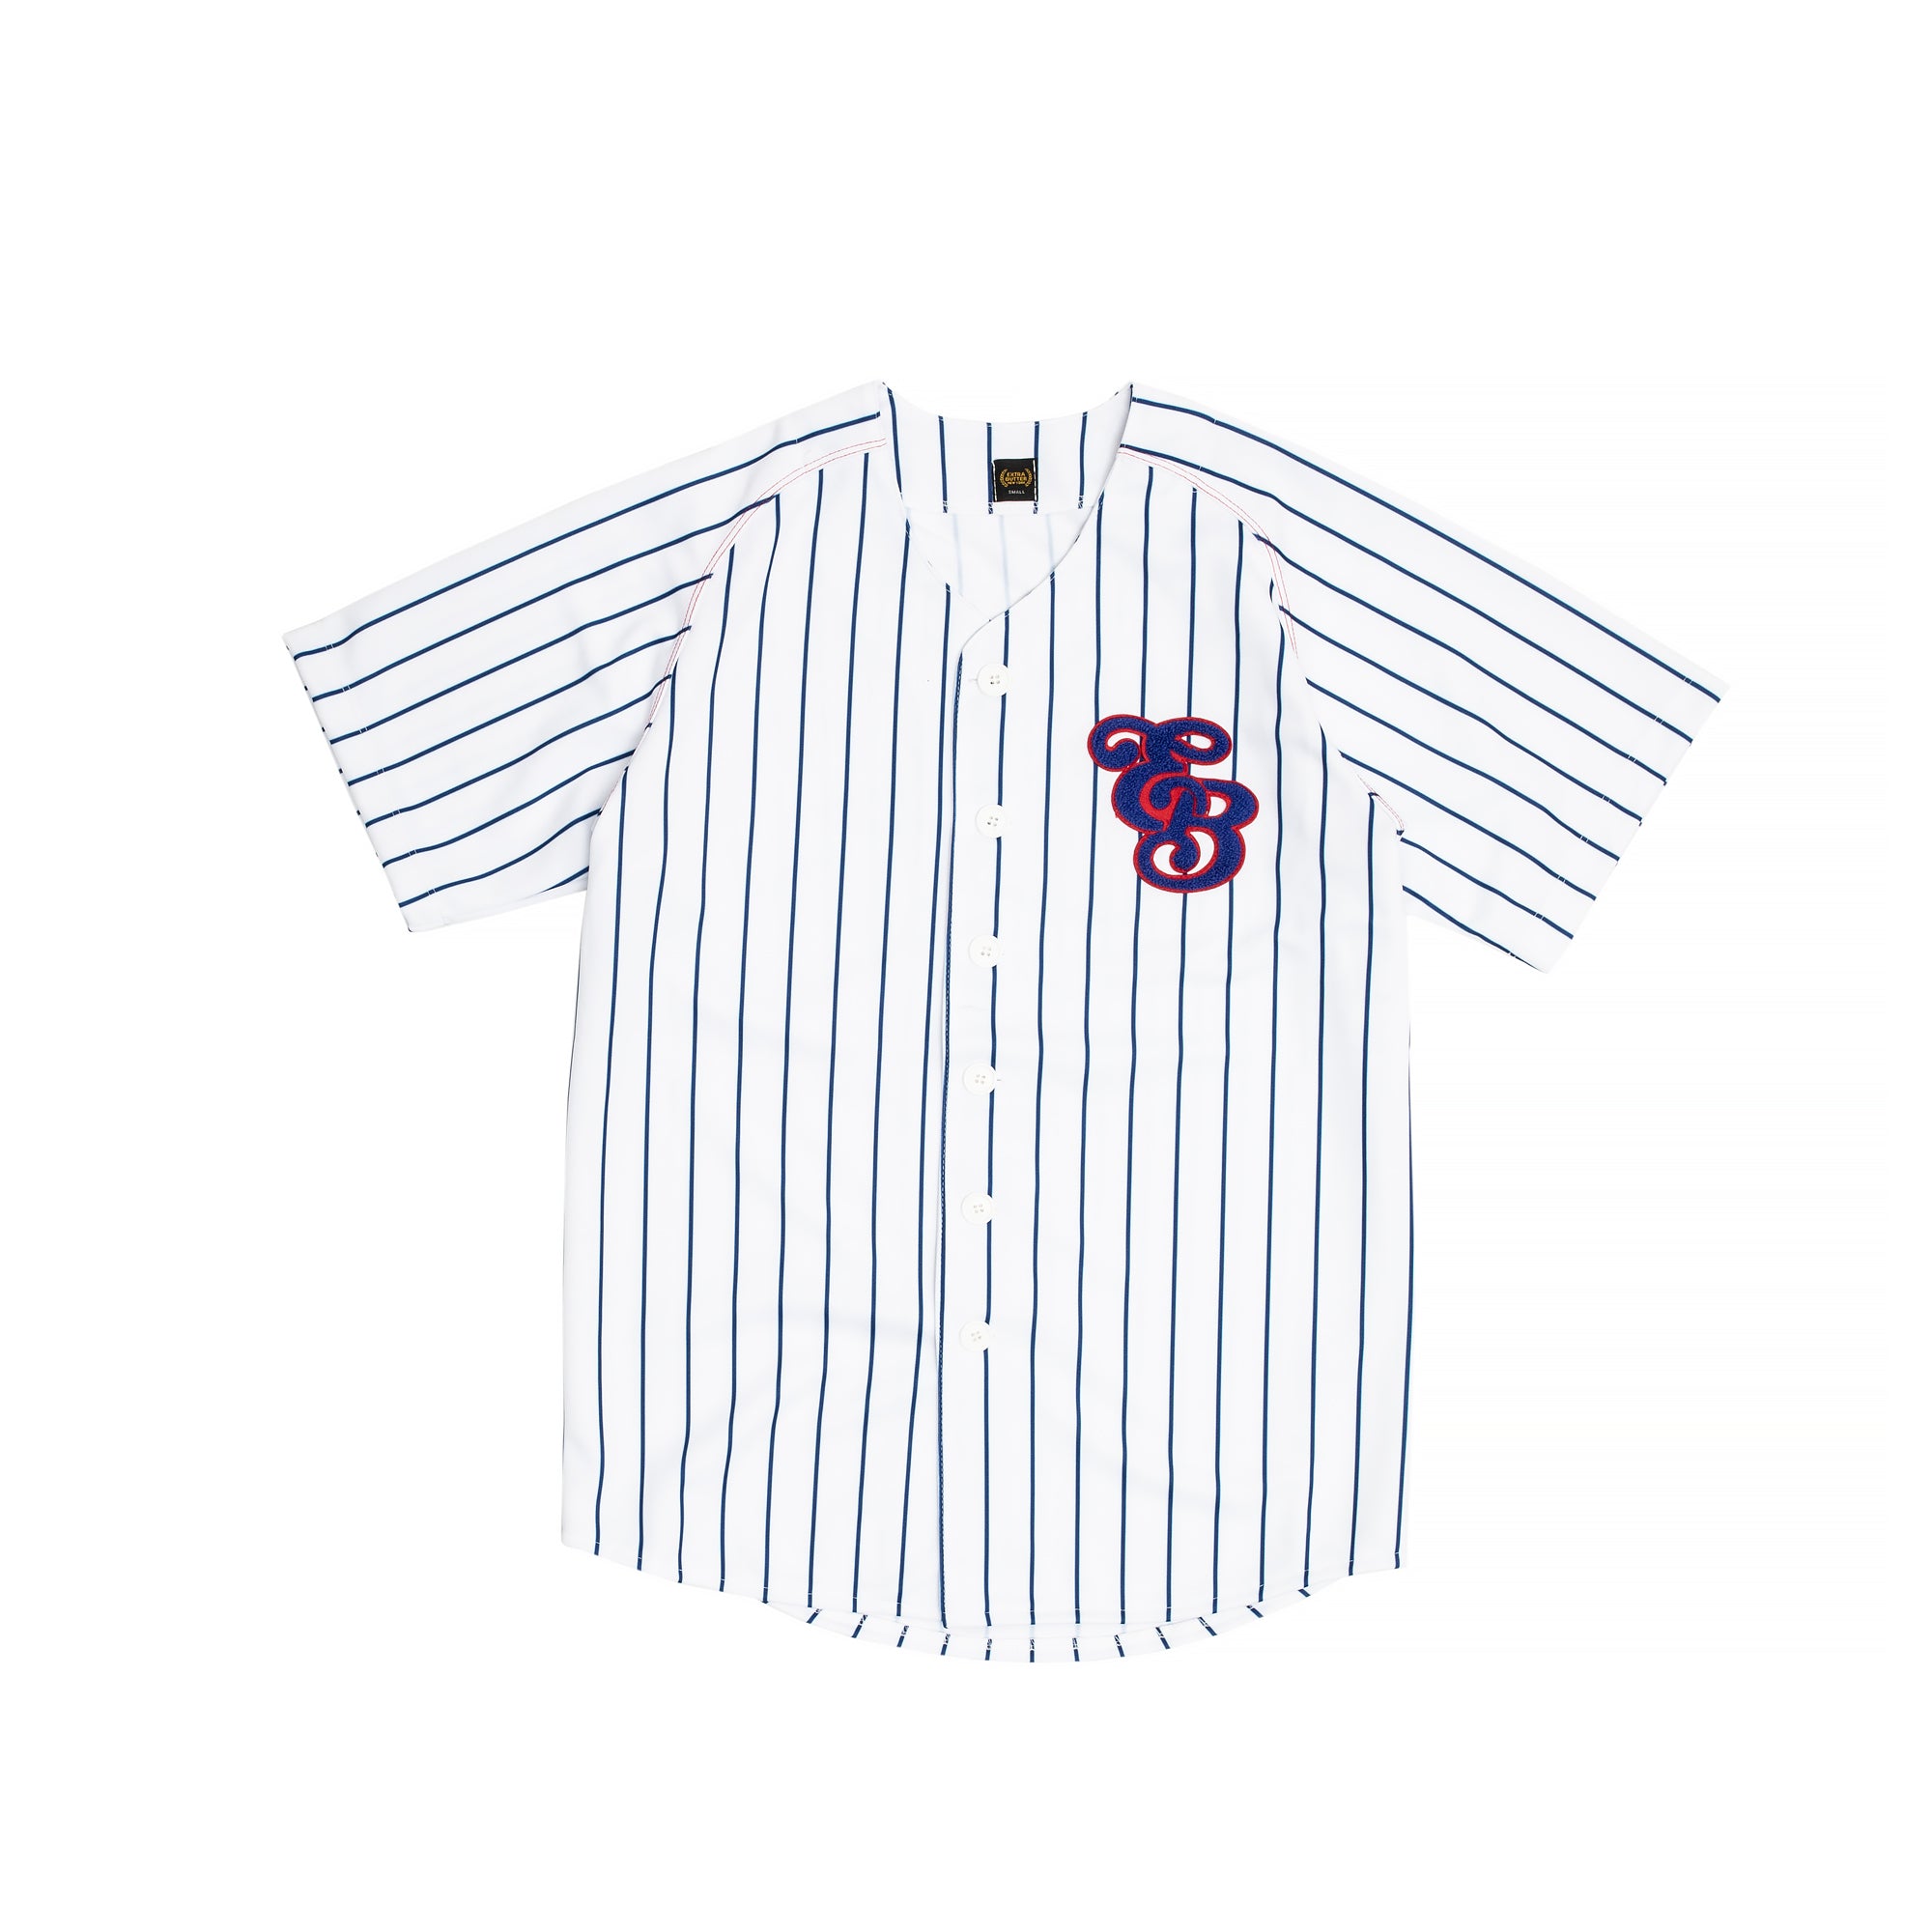 Pre-owned Supreme Patches Denim Baseball Jersey 'denim' In Blue